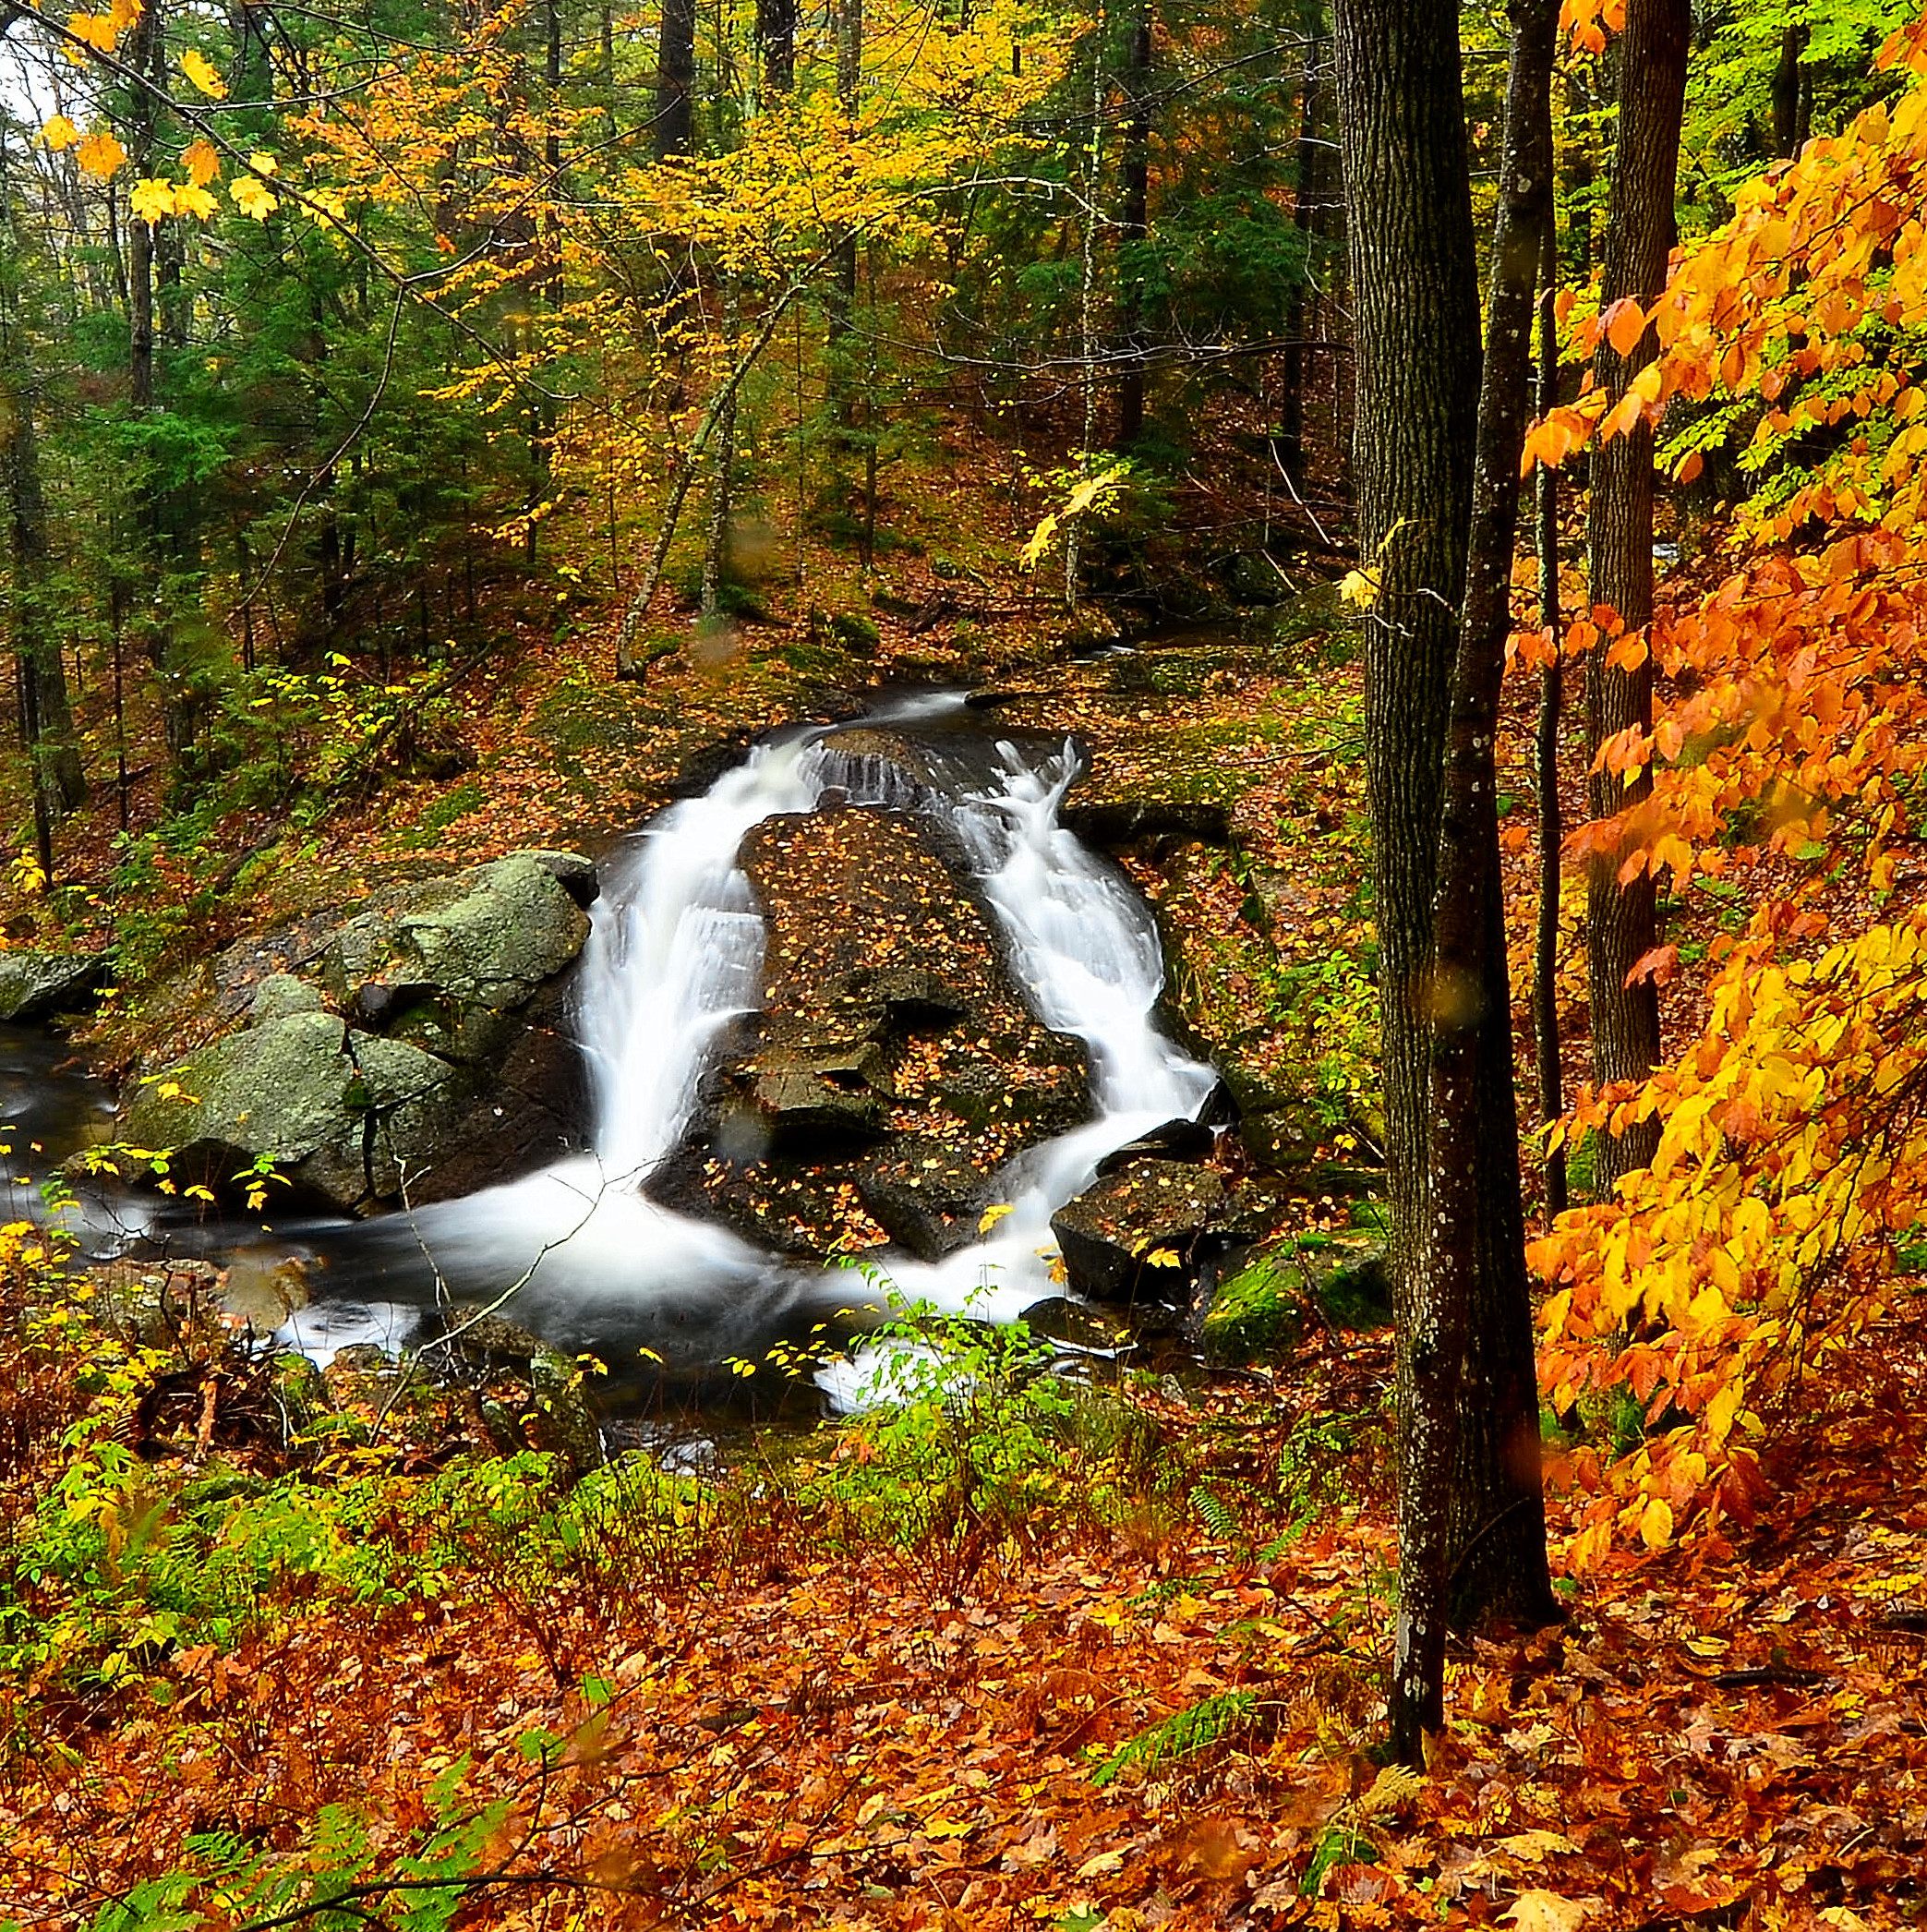 Lower Falls Bailey Brook In Nelson, Nh (user submitted)